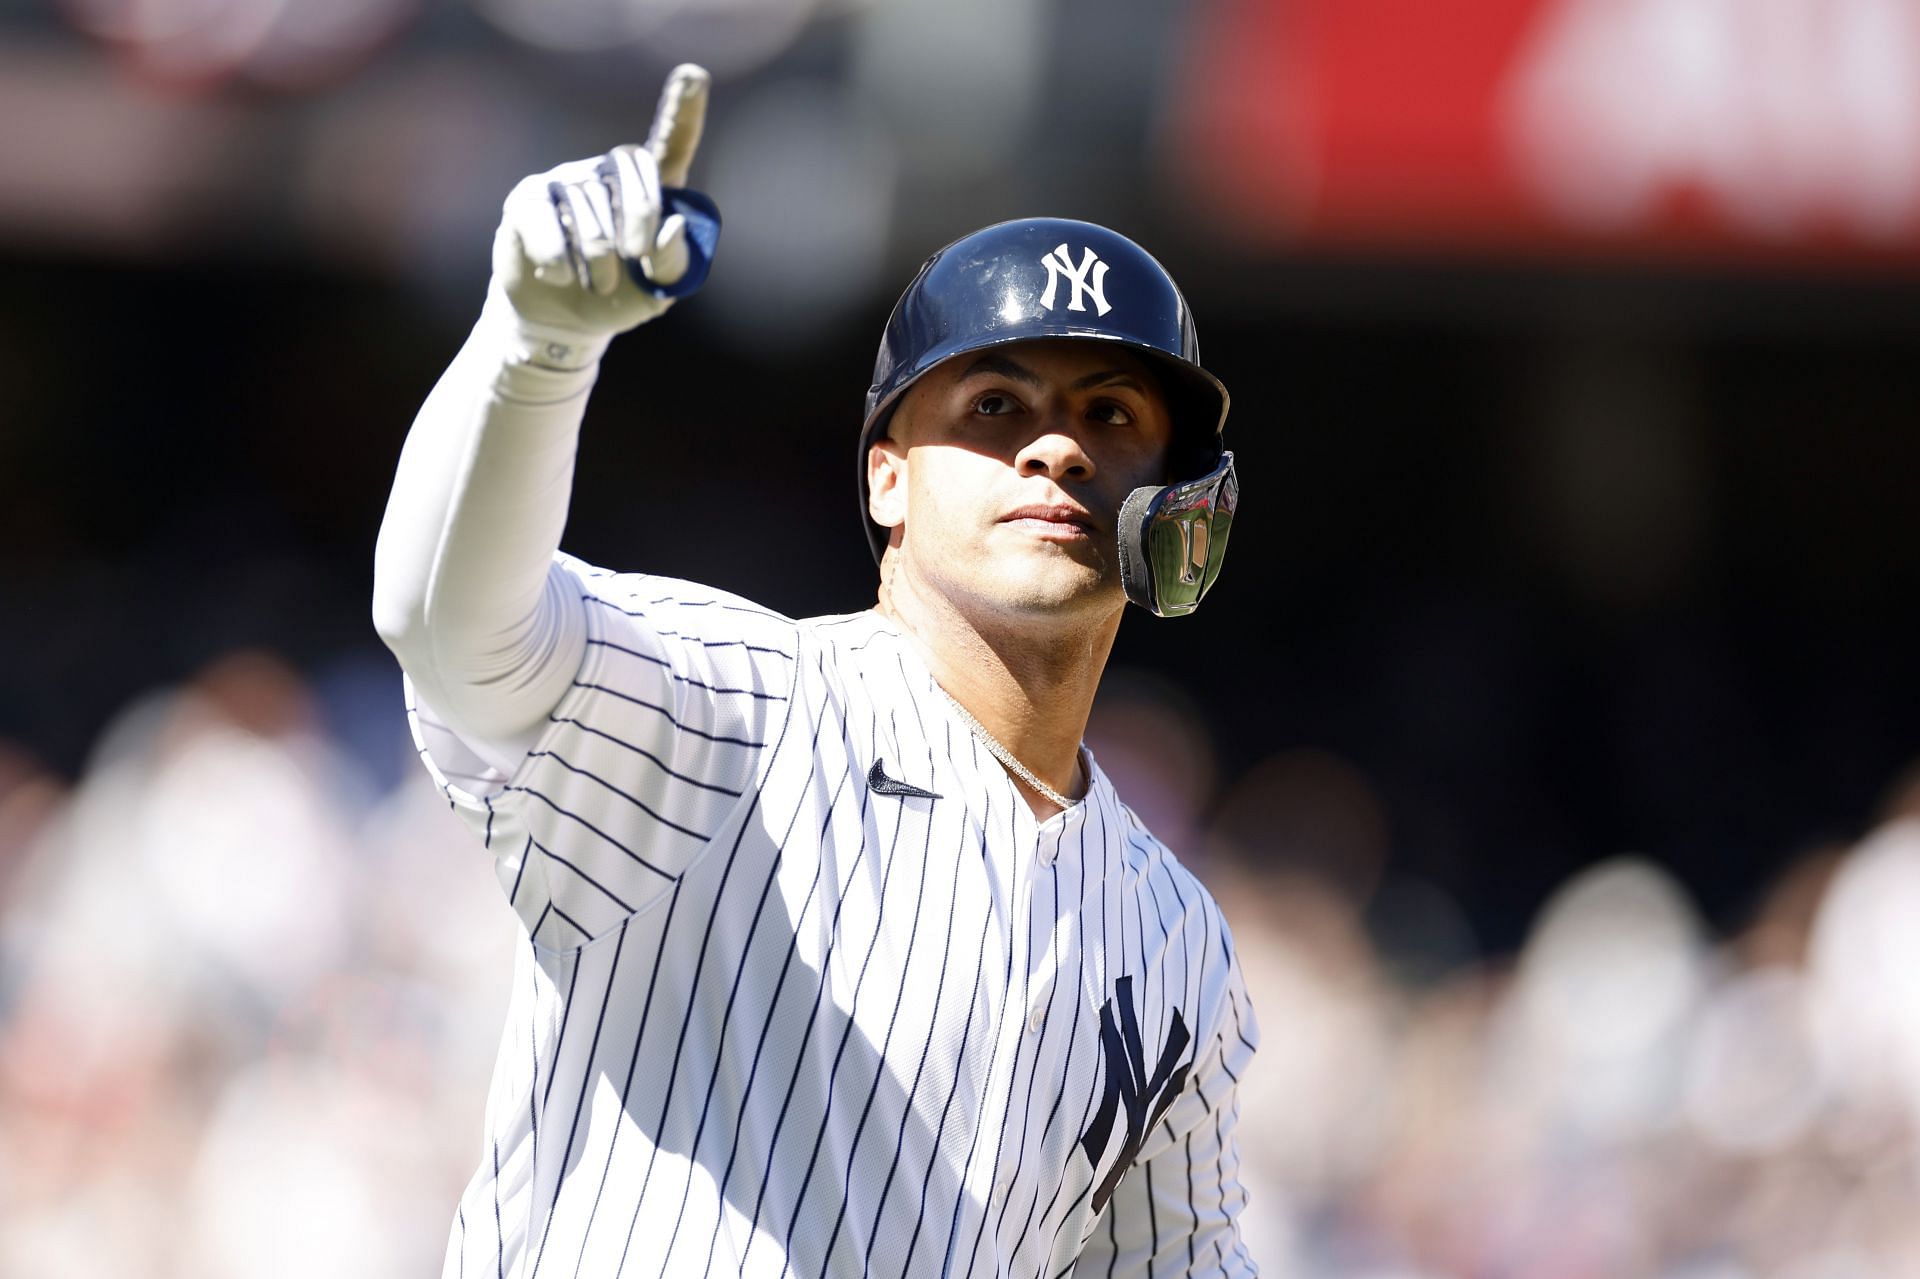 The Yankees' Gleyber Torres is starting to look very confident